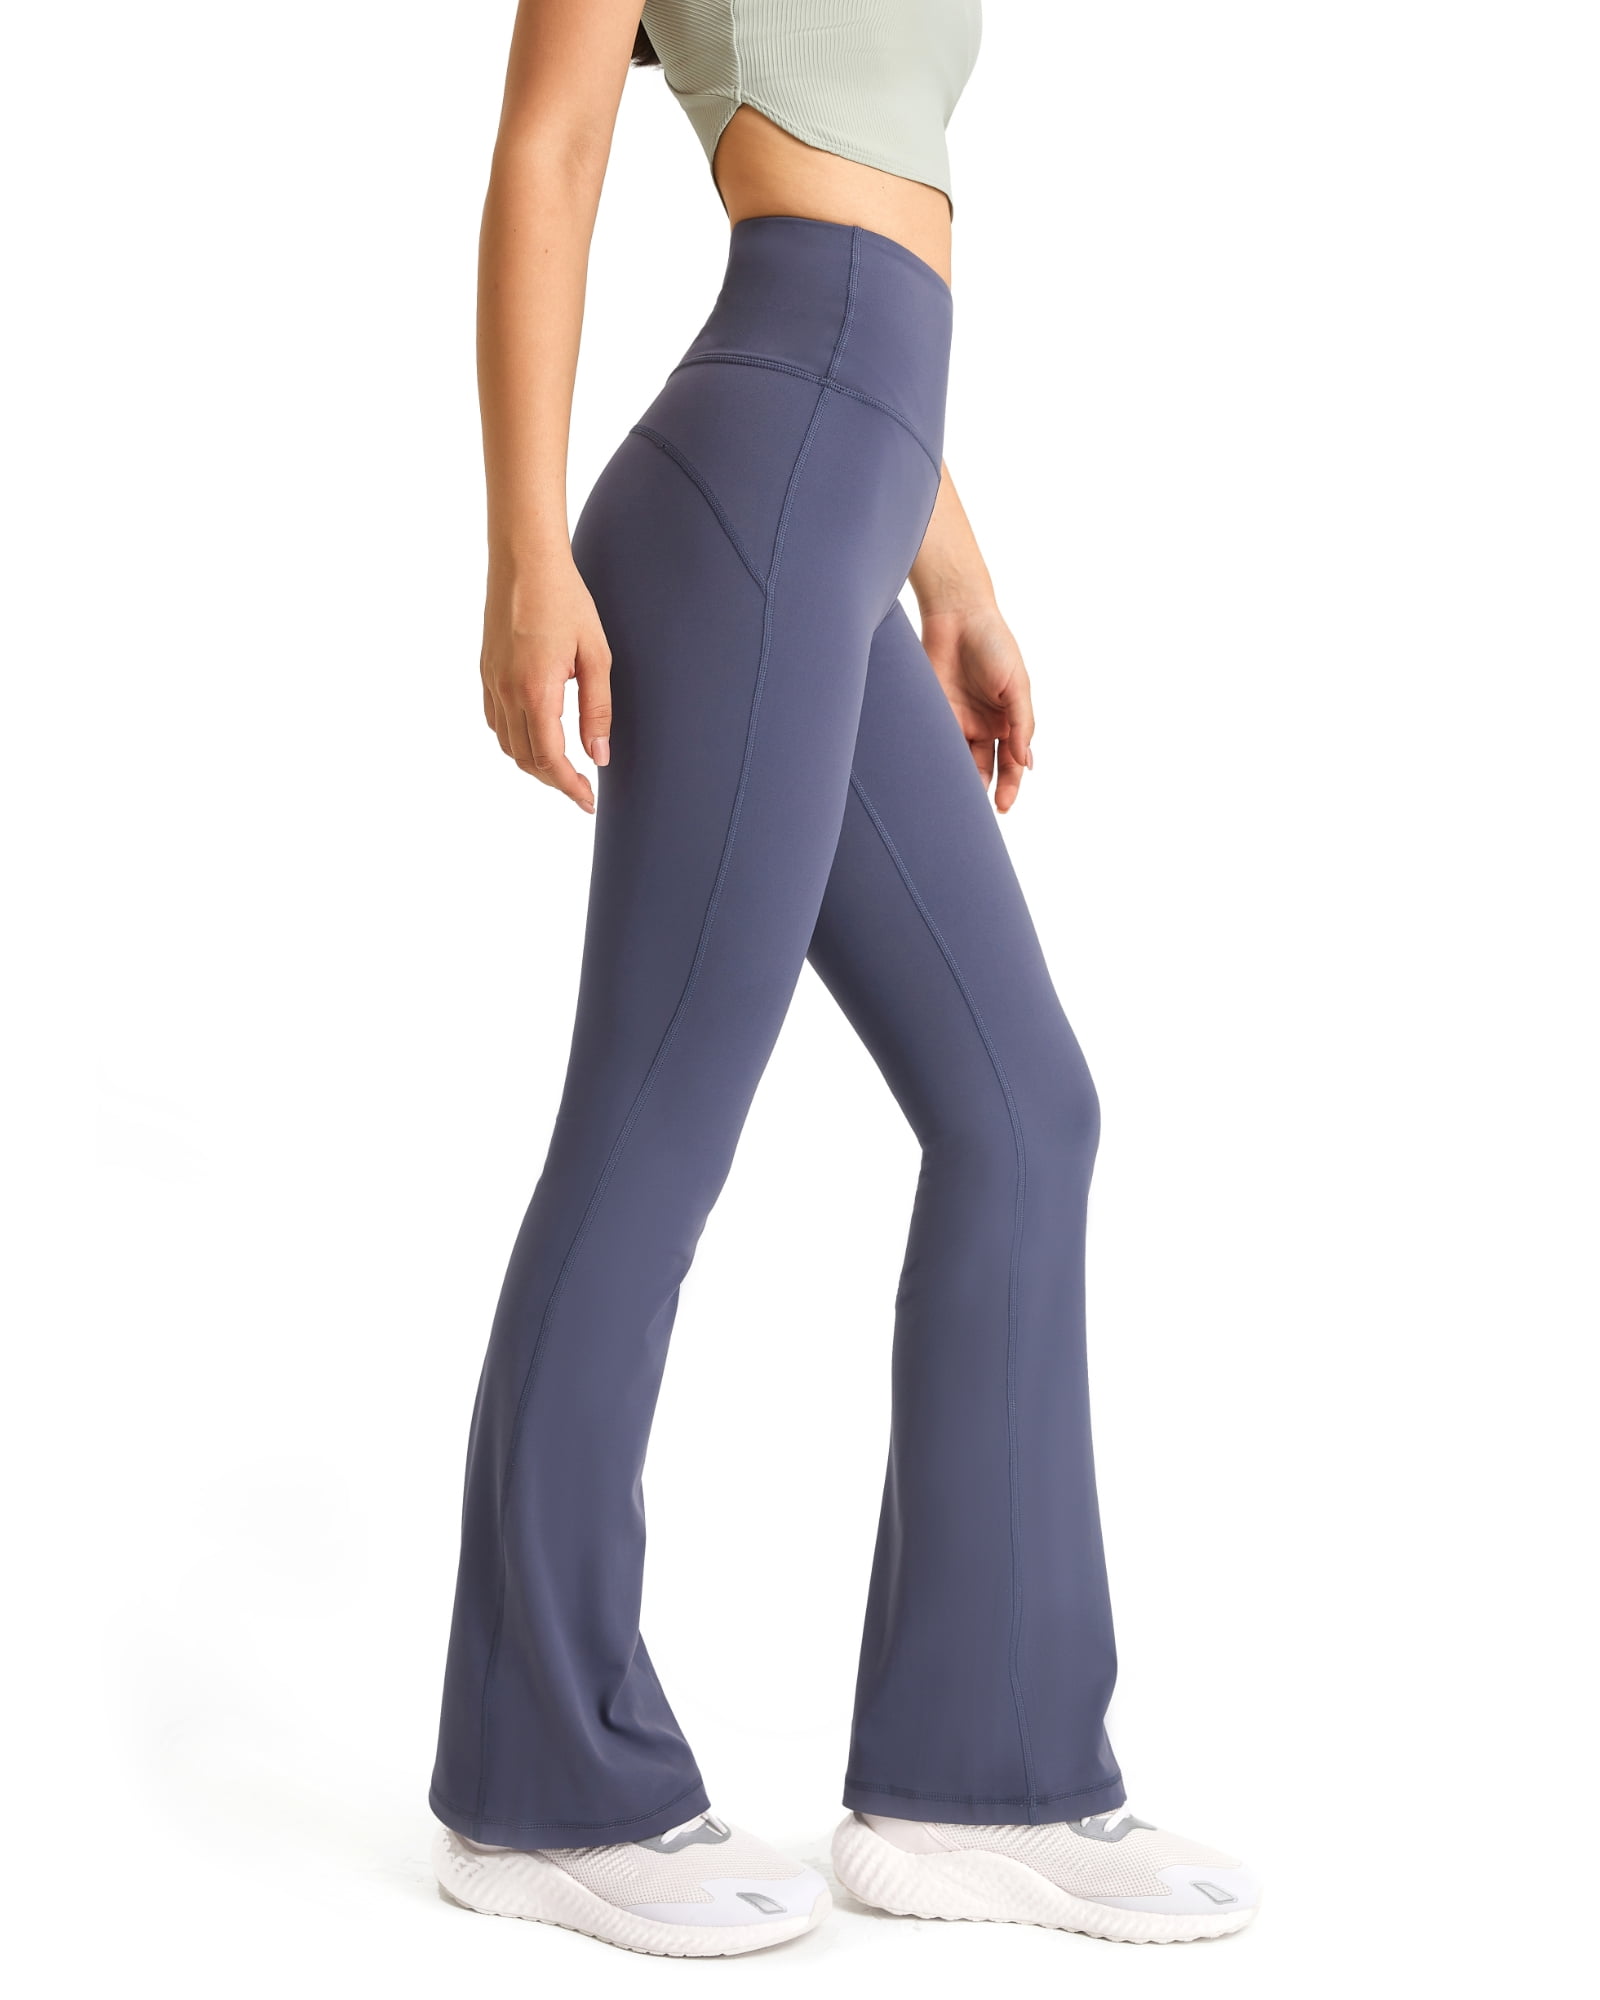 Womens High Waist Flare Yoga Flare Leggings Super Stretchy Leggings For Gym  And Workouts With Wide Killer Legs LU 088 From Ai792, $23.47